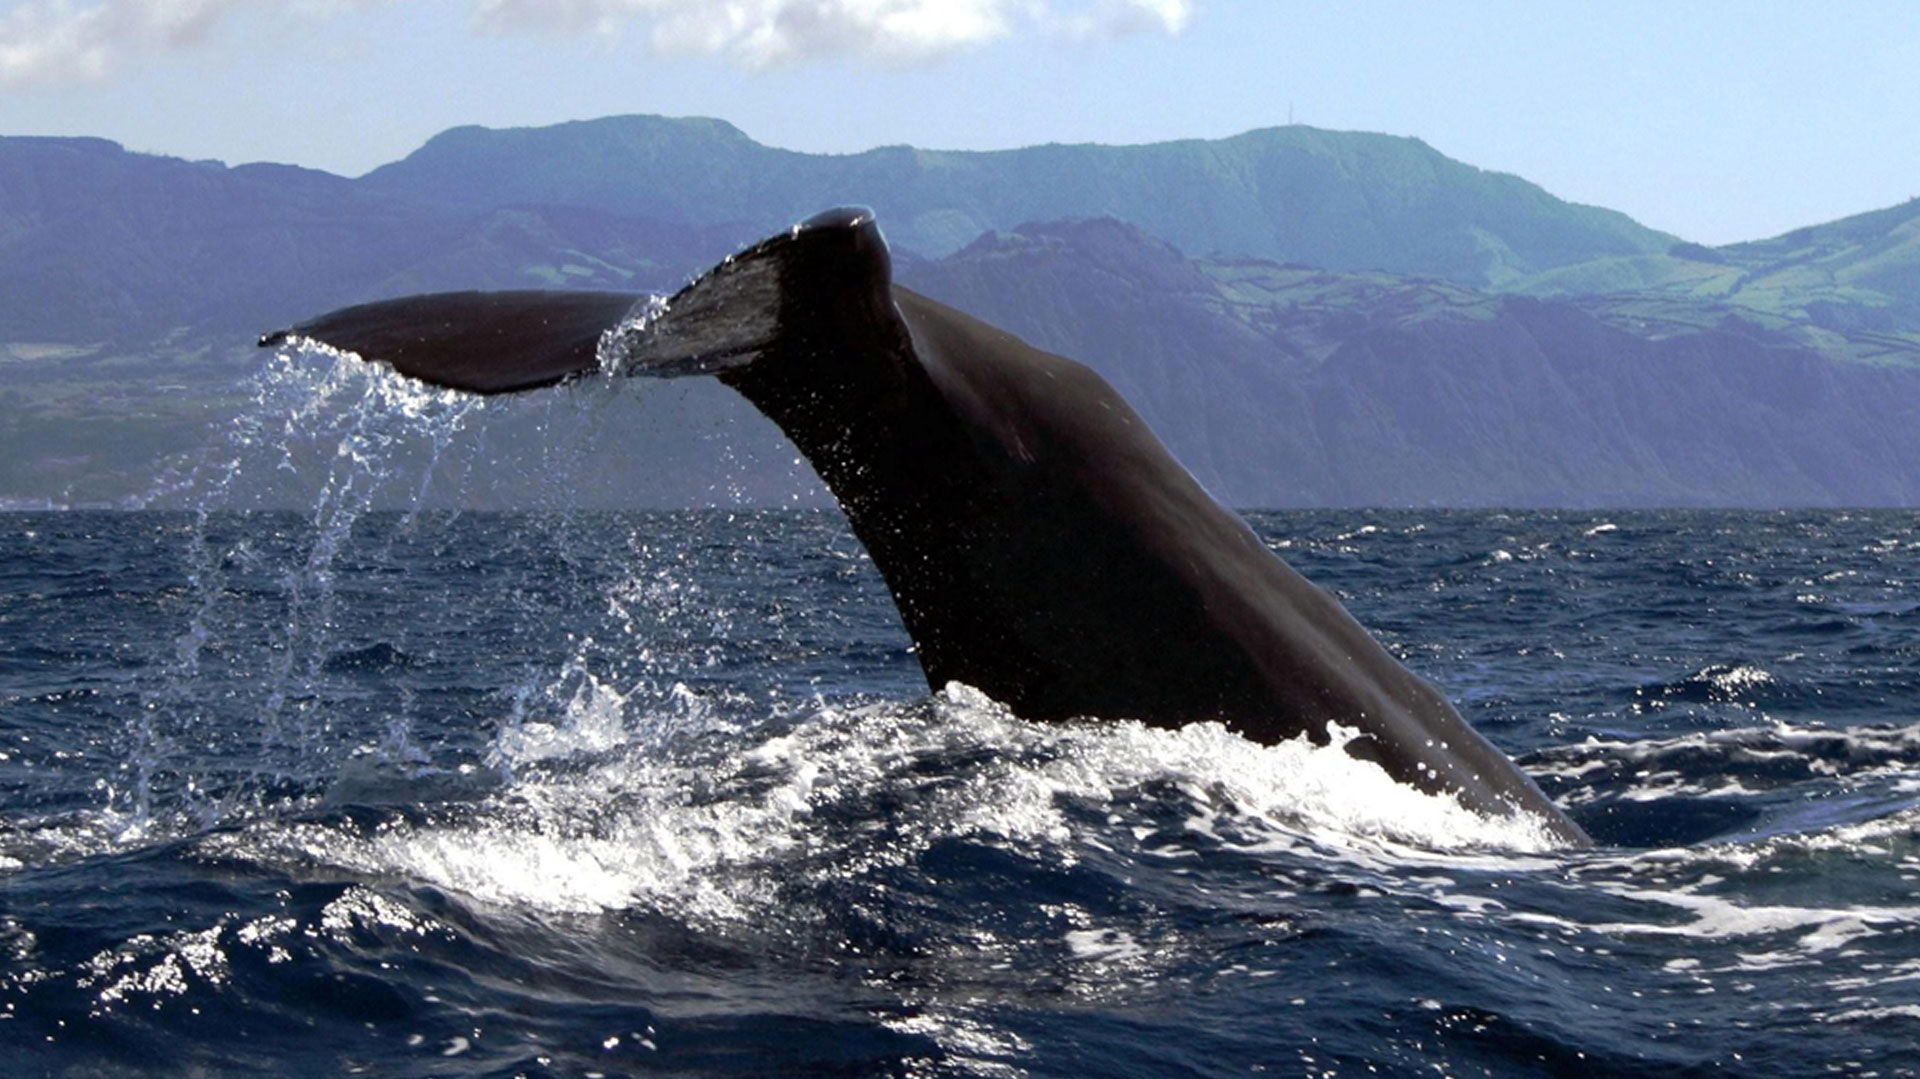 Azores Islands Whale Watching & Islet Boat Tour